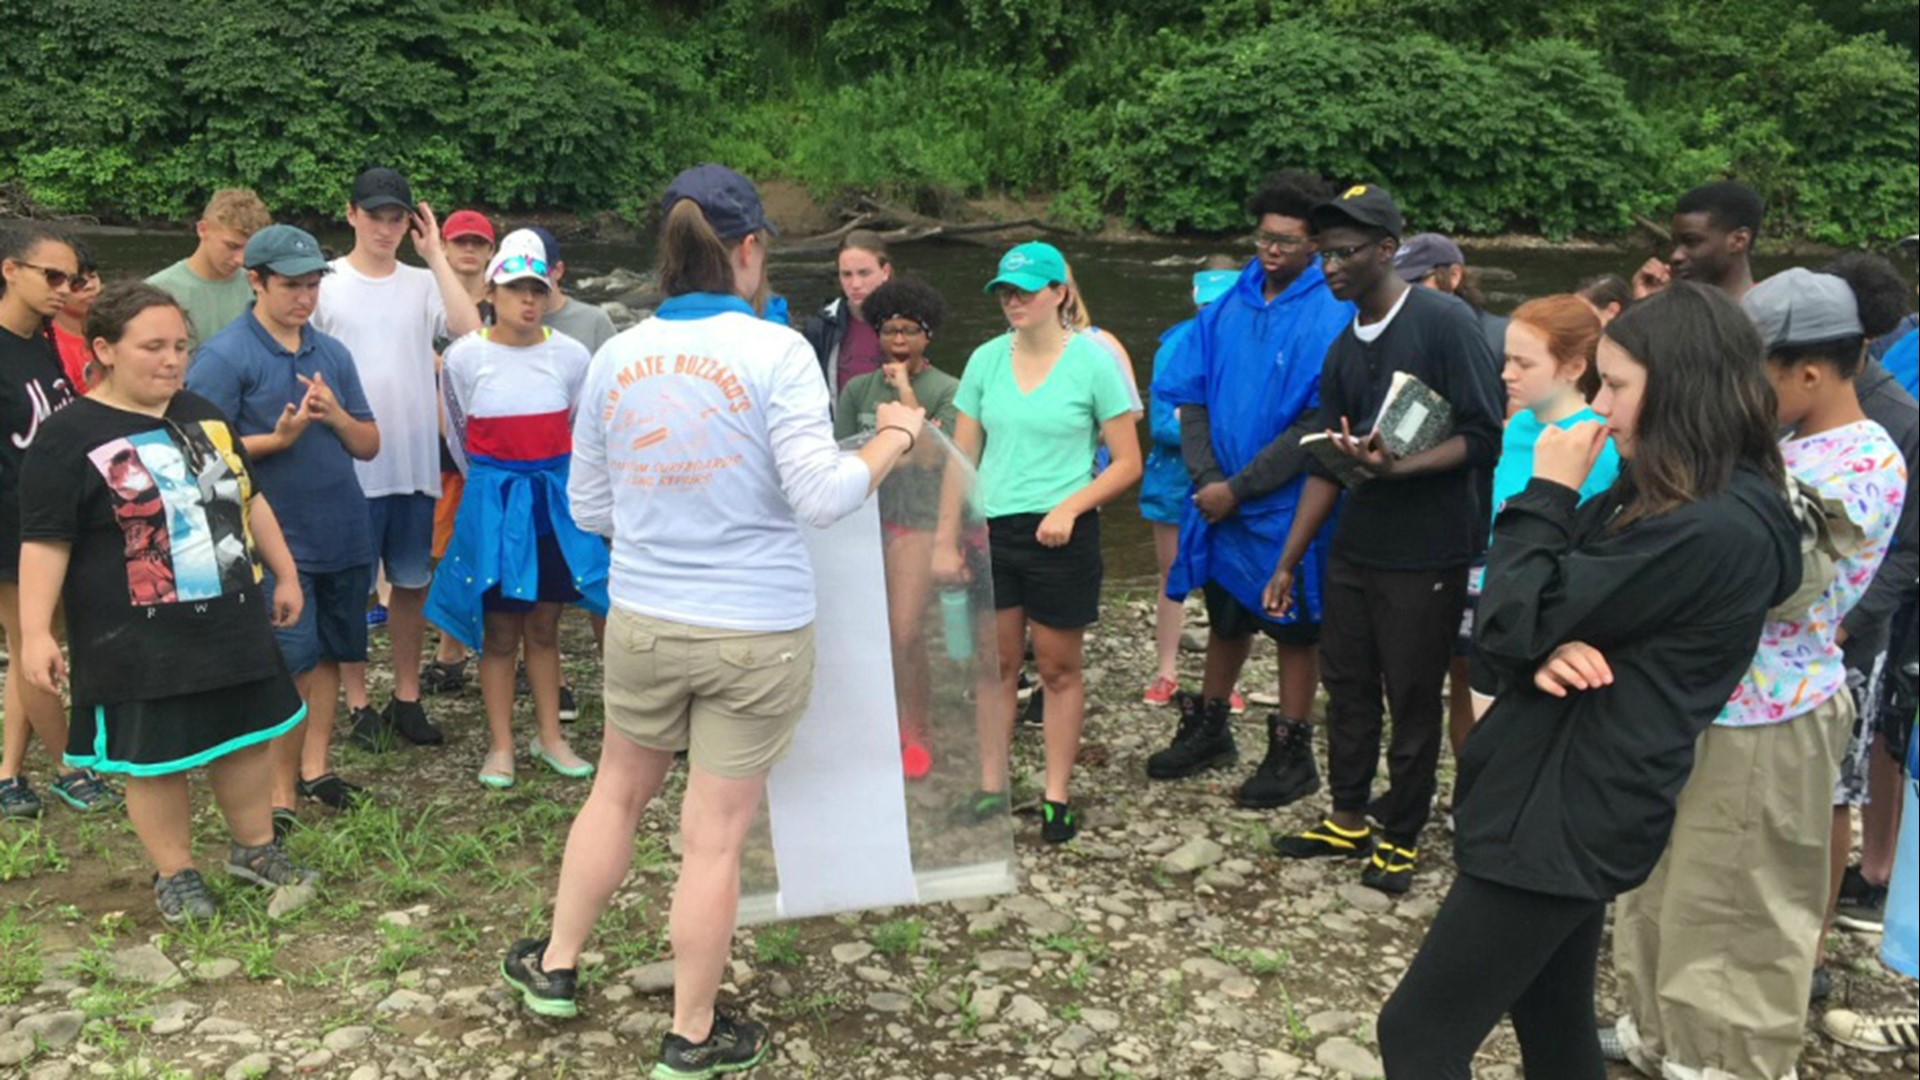 Educators at the Kettle Creek Environmental Education Center in Monroe County have found creative ways to continue environmental outreach during the pandemic.